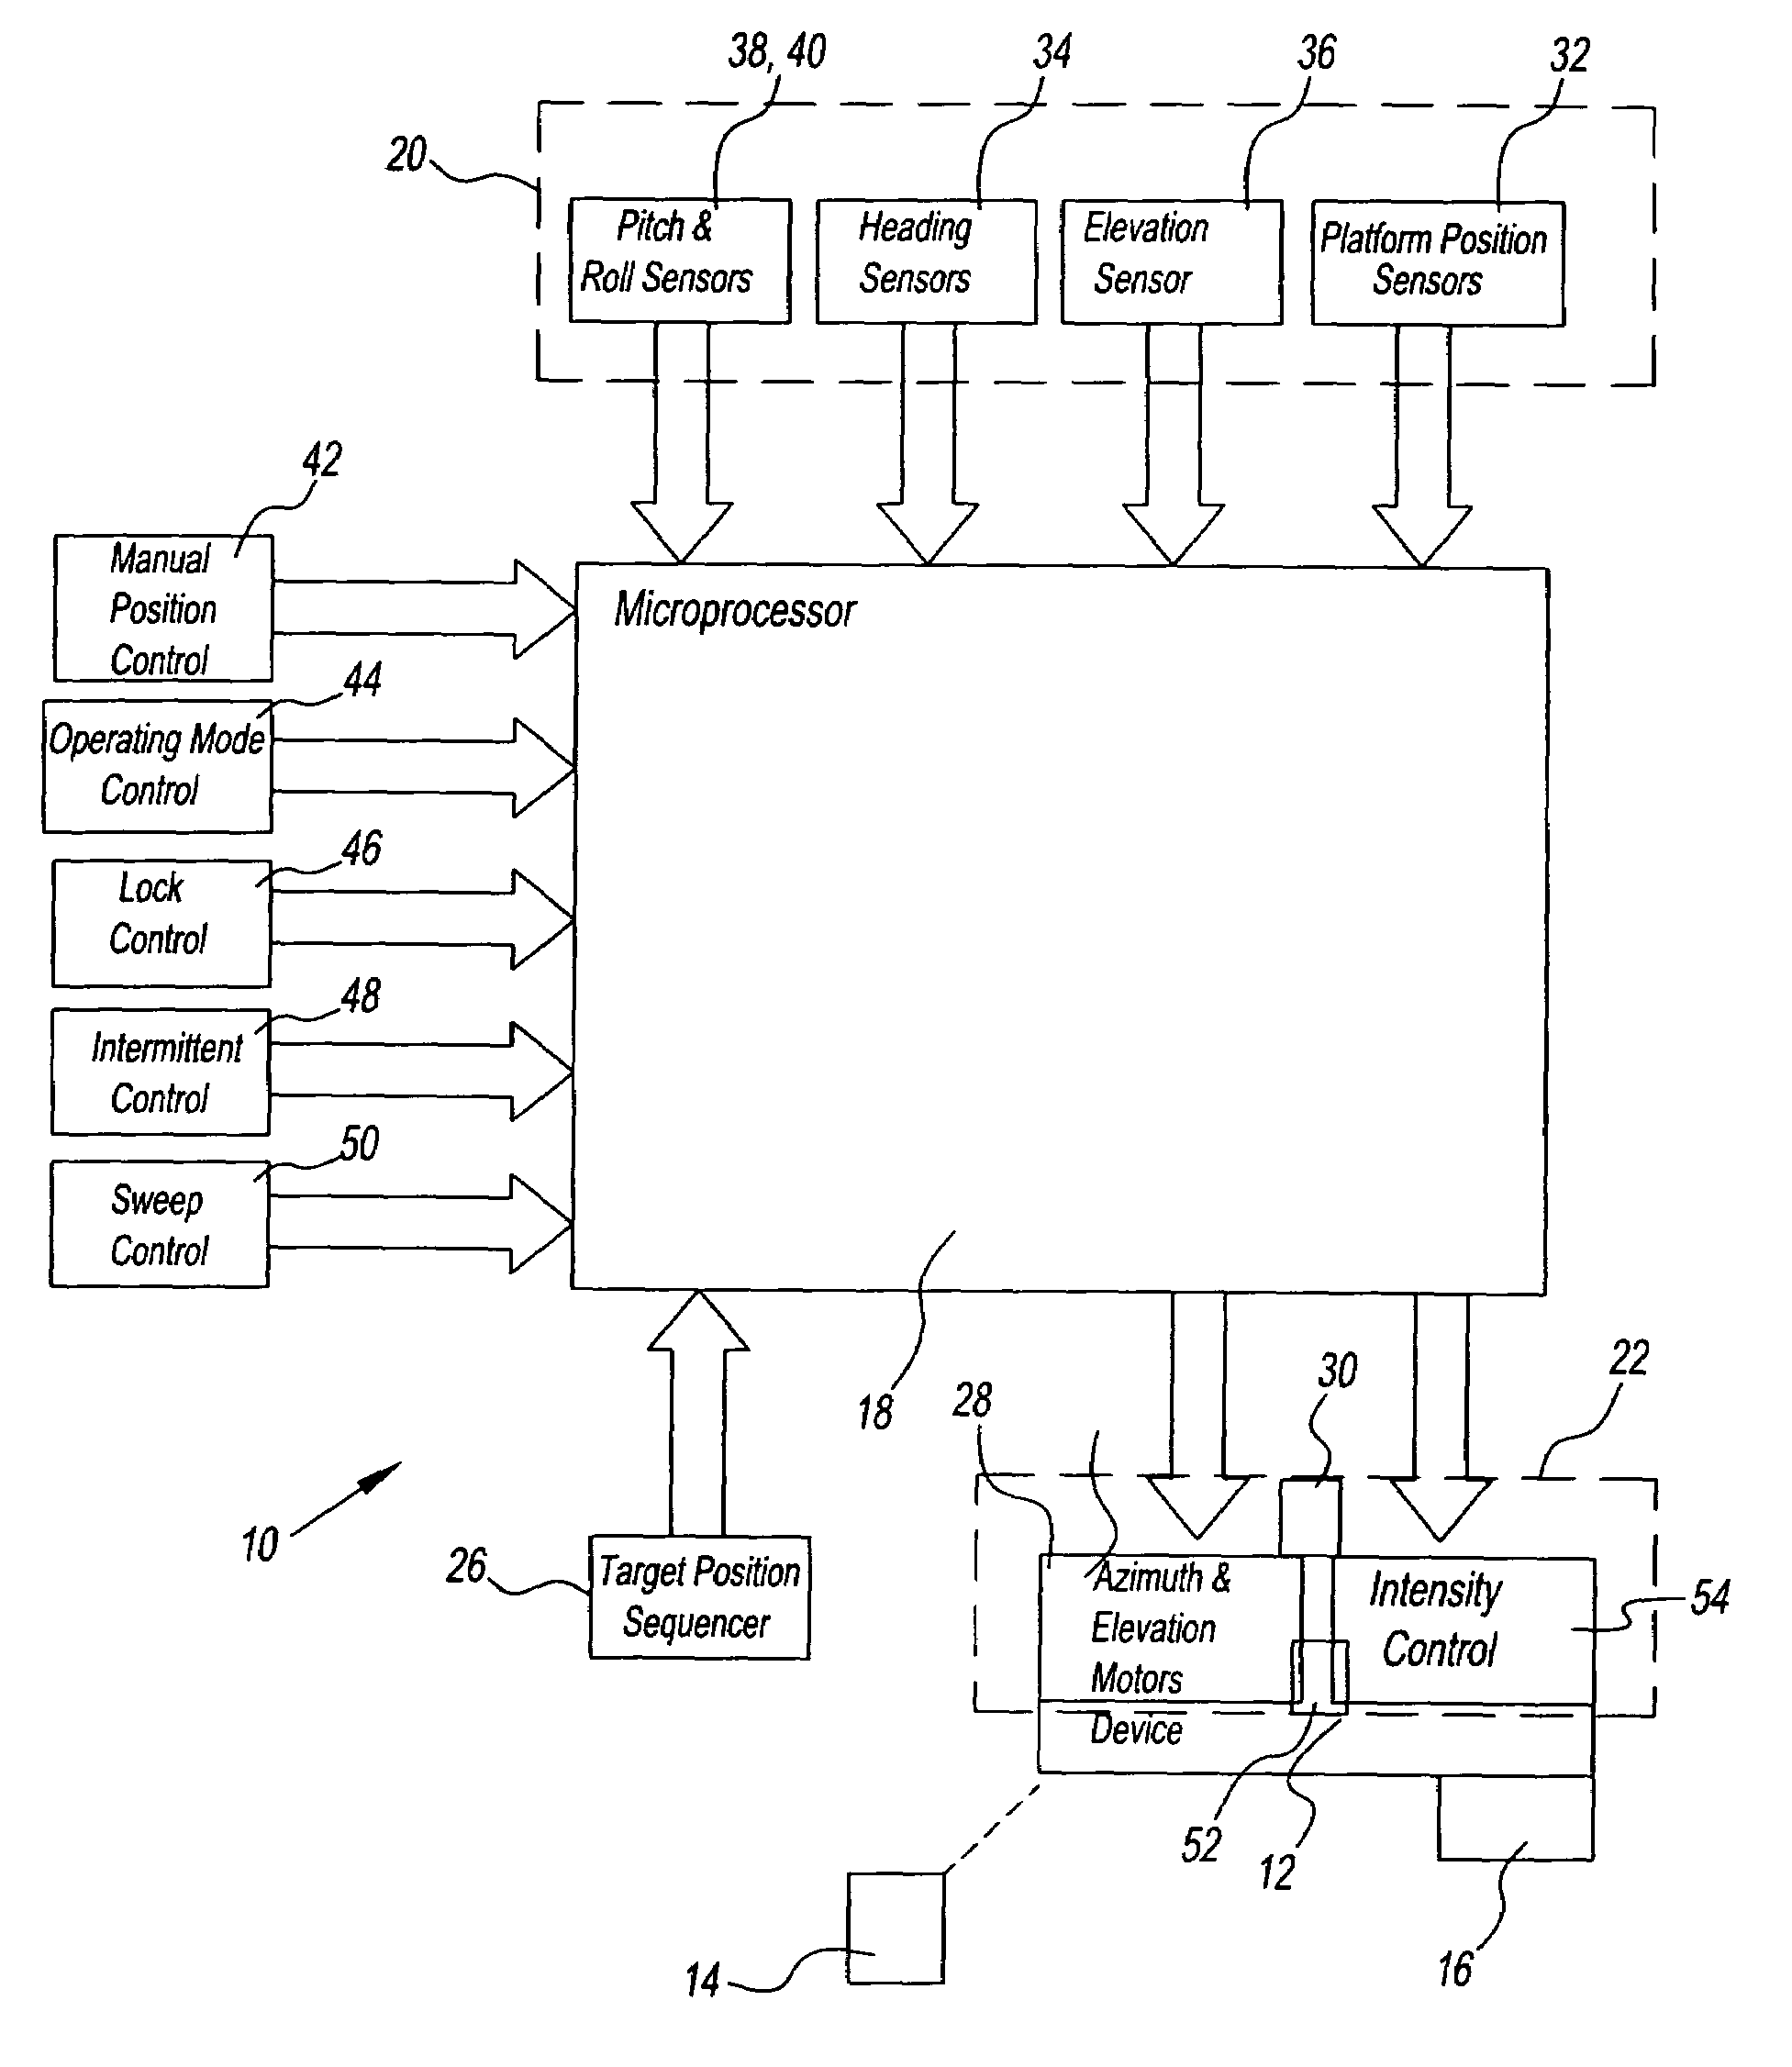 Apparatus for automatically pointing a device at a target